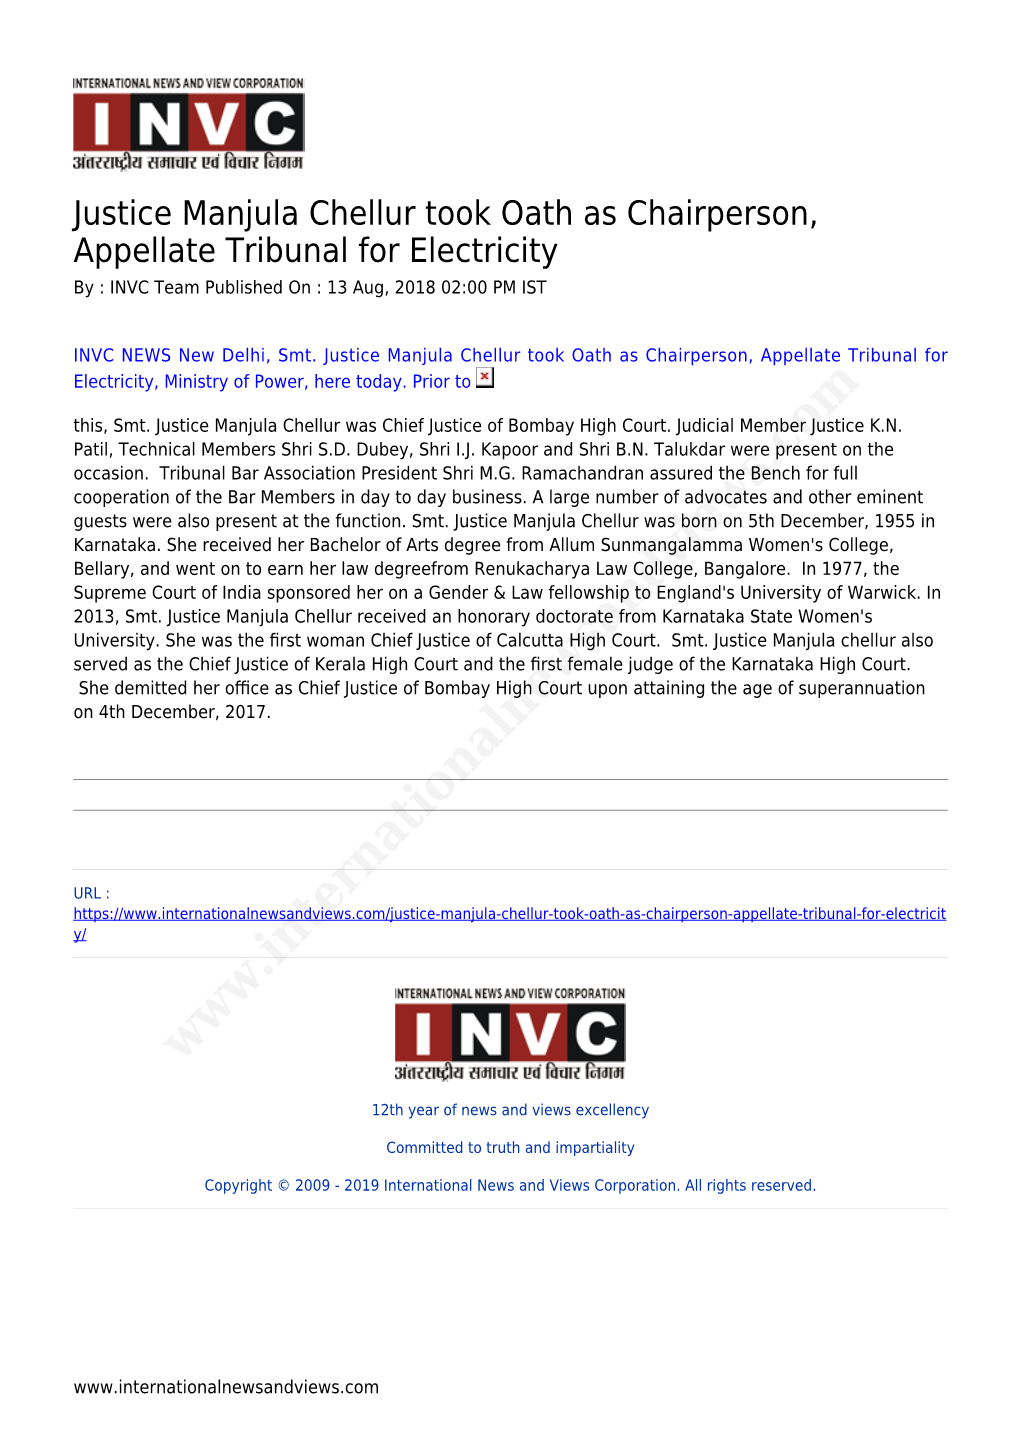 Justice Manjula Chellur Took Oath As Chairperson, Appellate Tribunal for Electricity by : INVC Team Published on : 13 Aug, 2018 02:00 PM IST